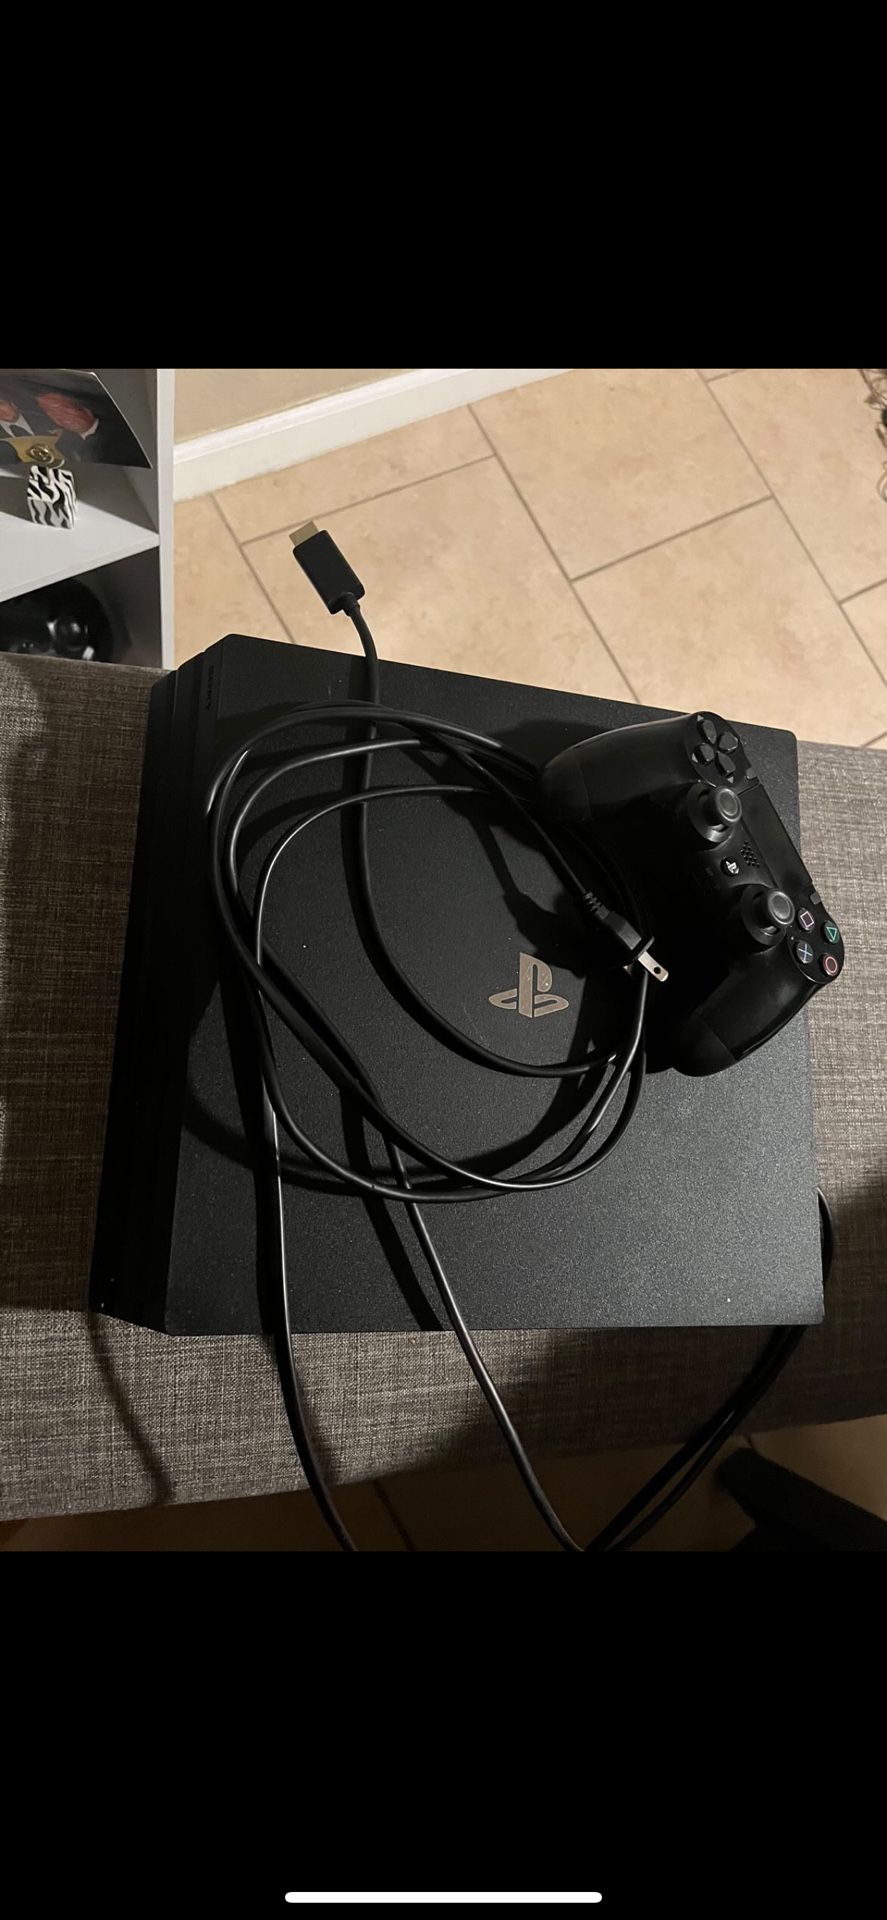 Selling a PS4 pro box included